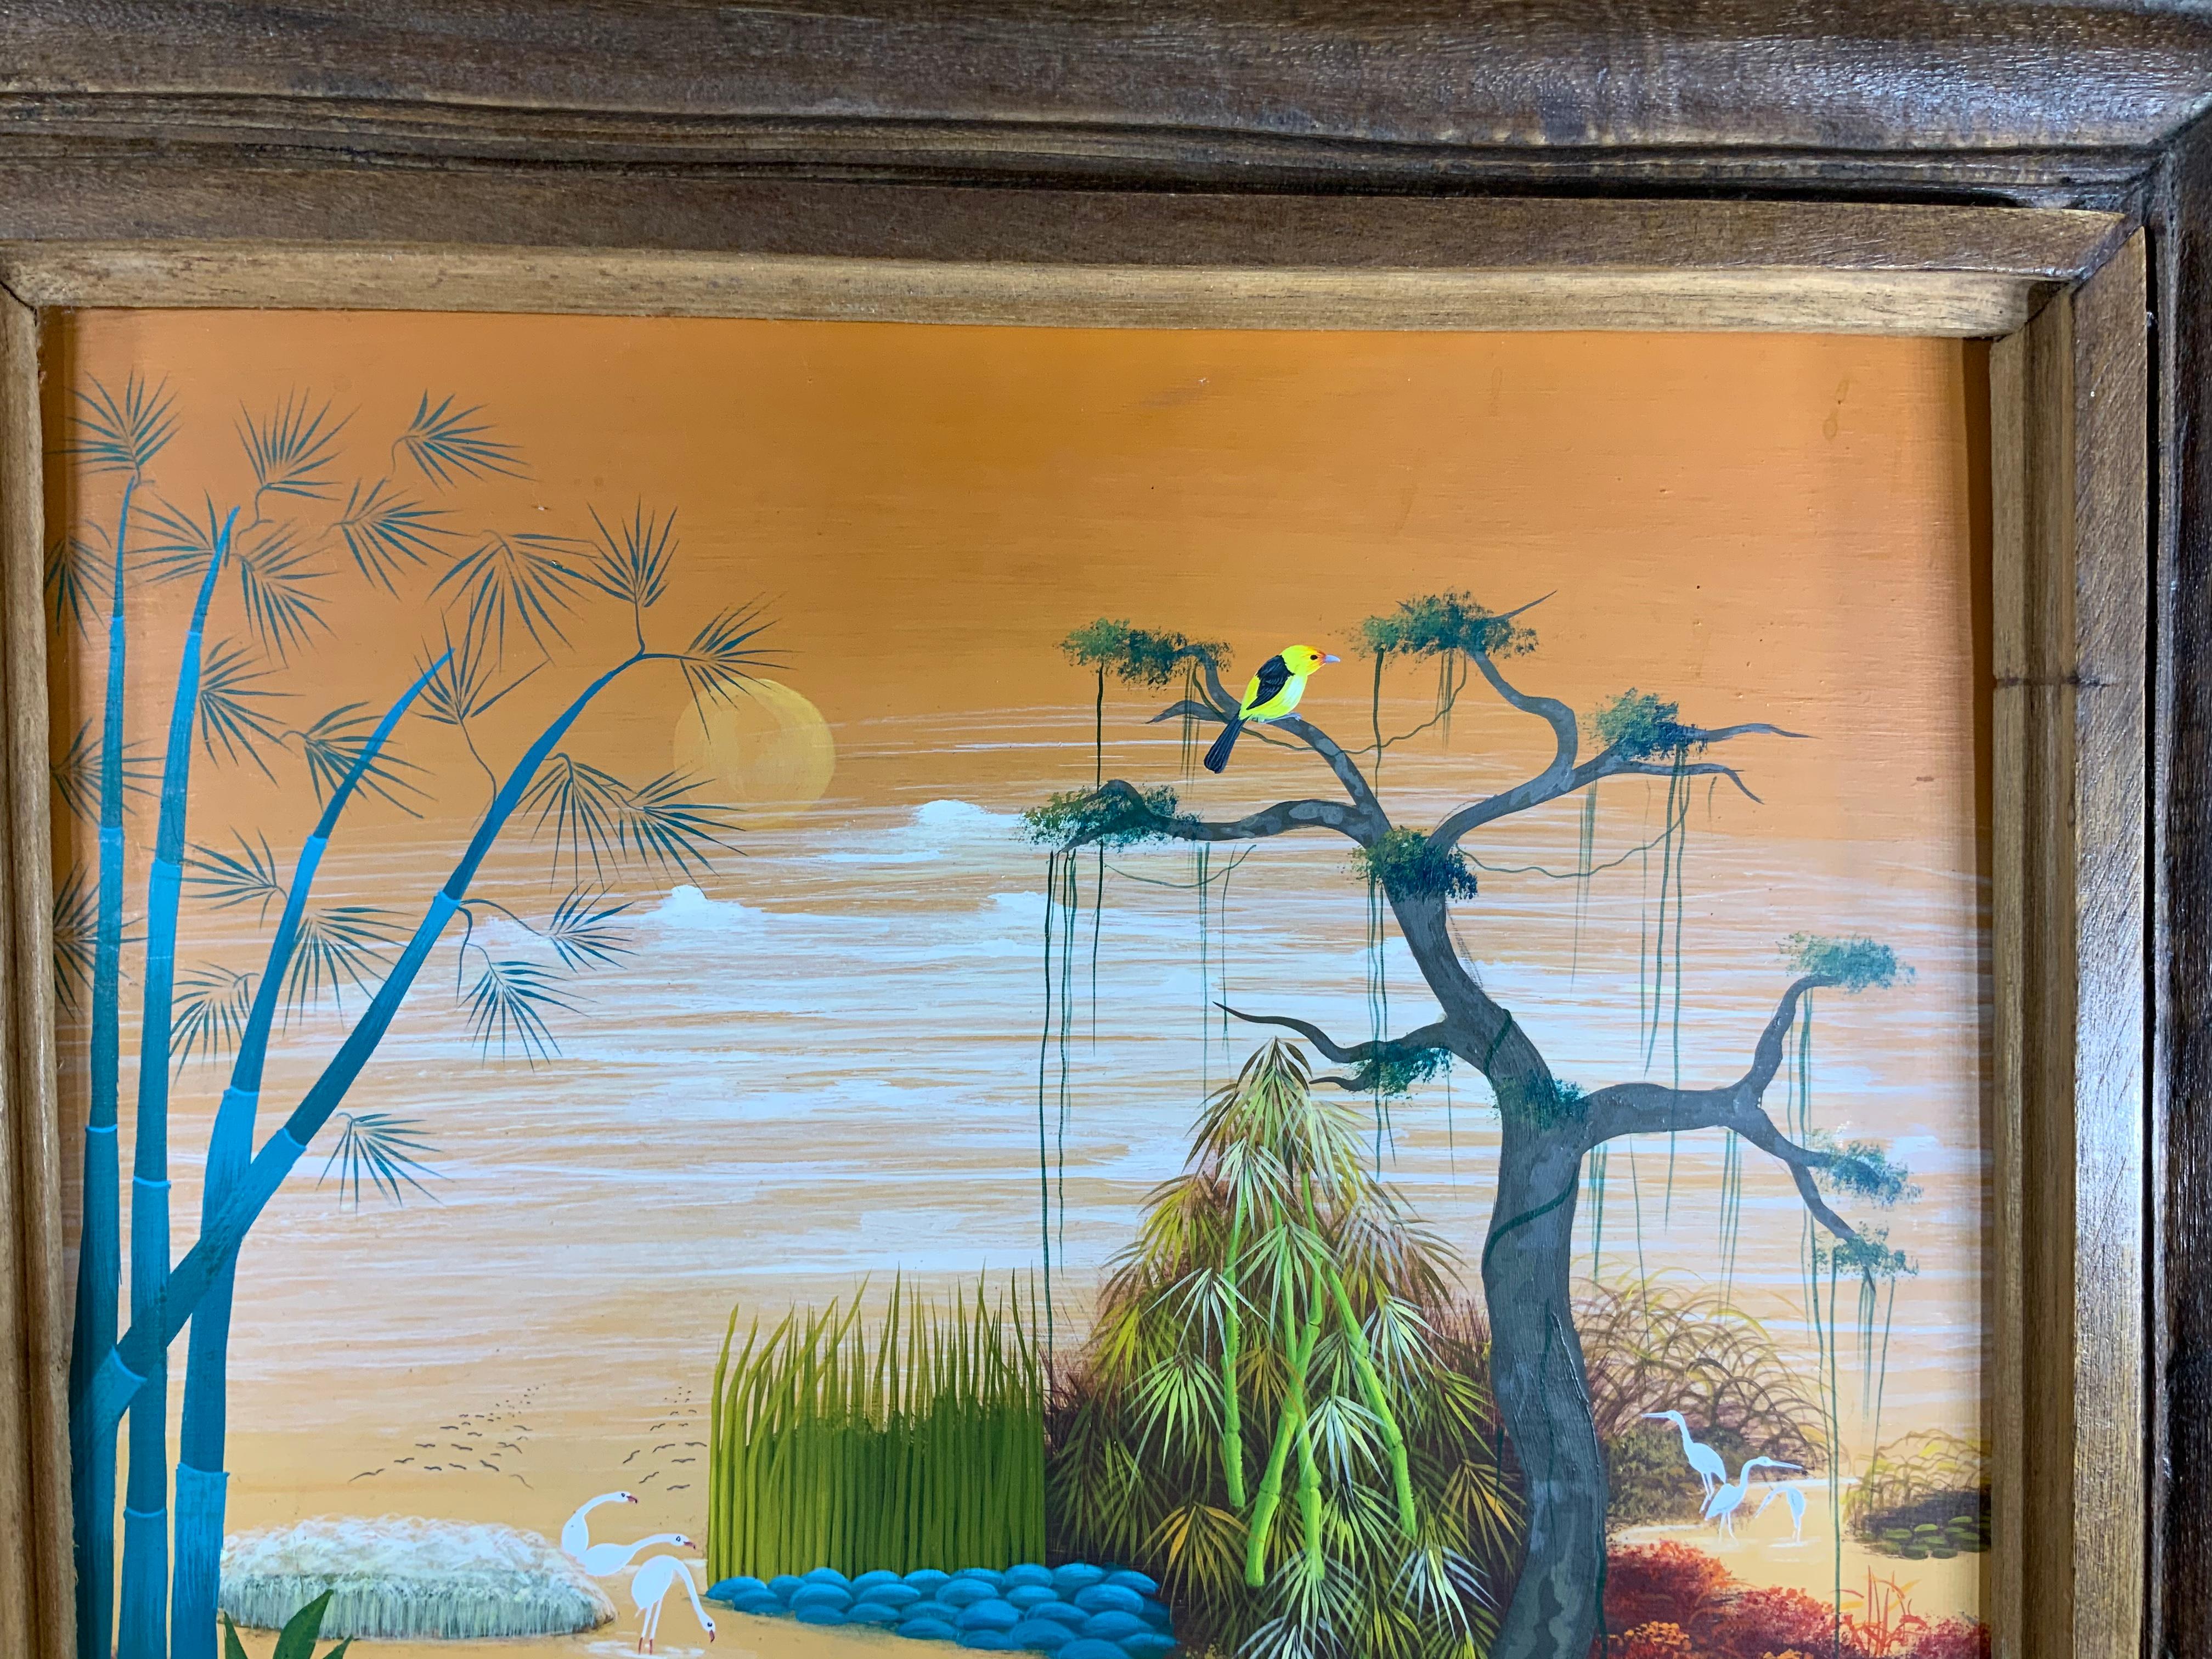 Exceptional oil painting by French/Haitian artist of mix of real or surrealism style beautiful vivid details of birds and landscapes over the moon. Signed by the artist.